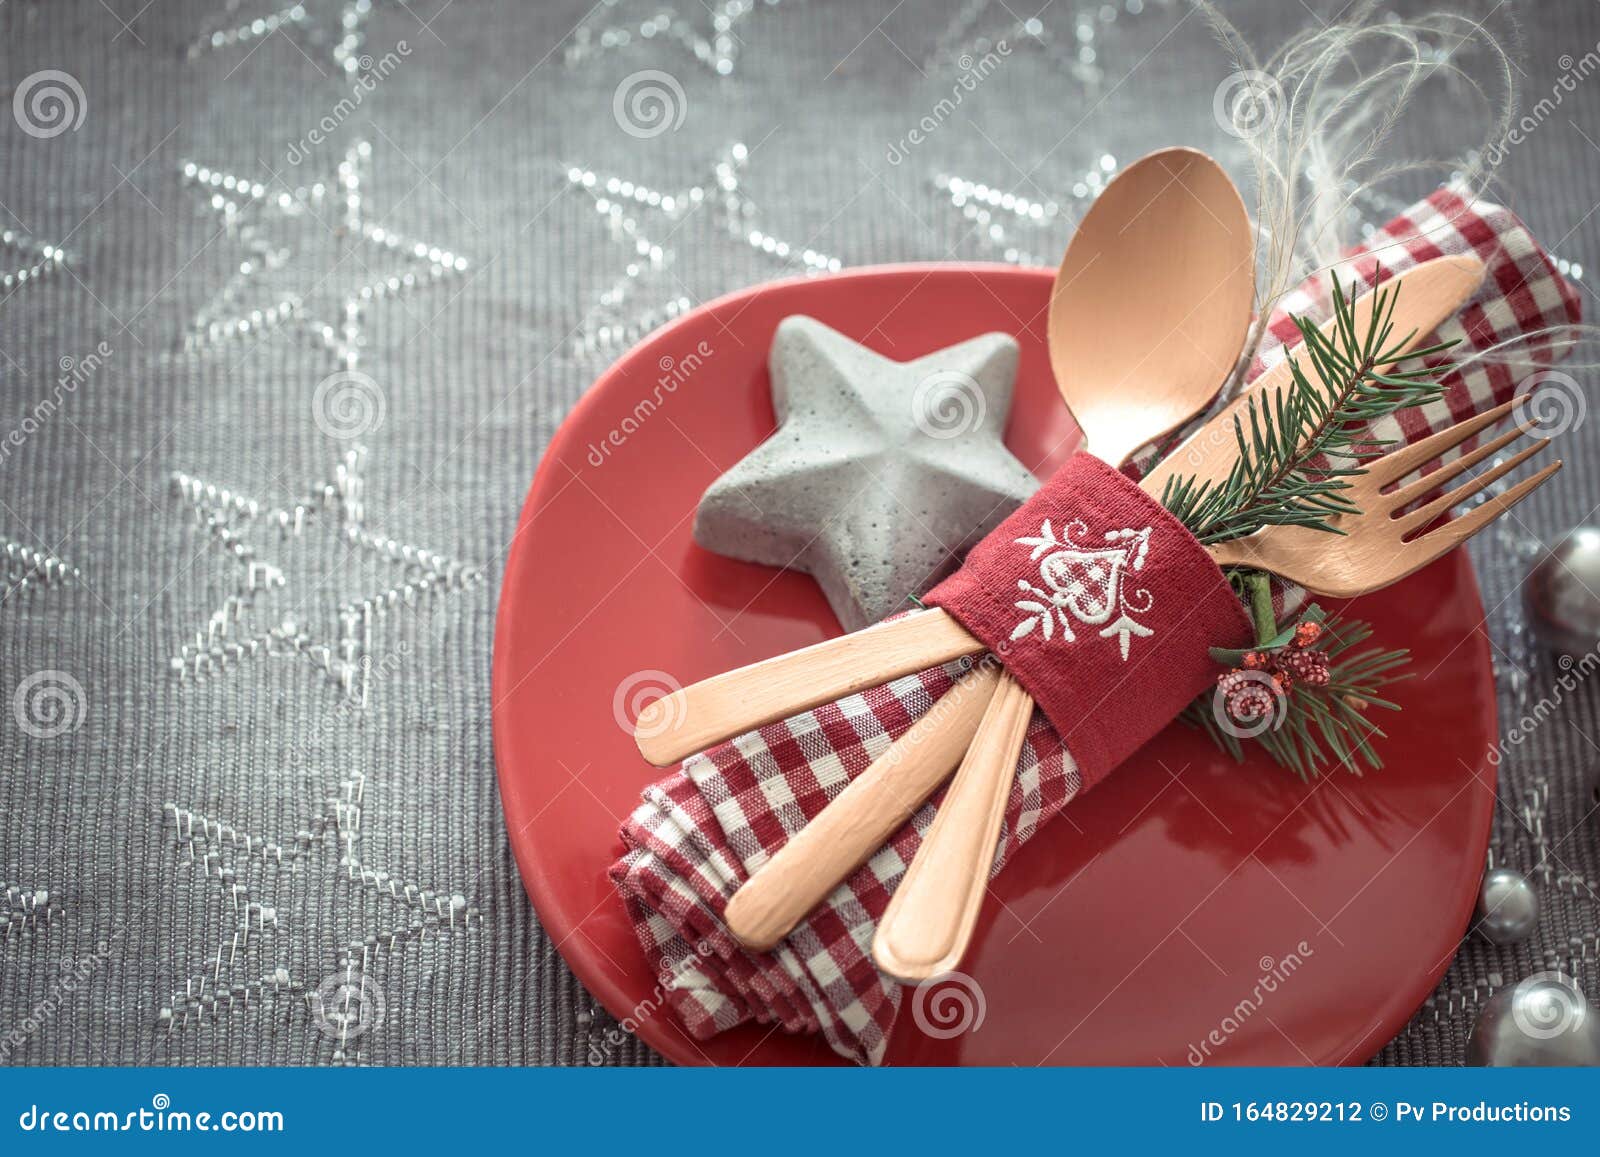 Beautiful Serving of Cutlery on the Christmas Table Stock Photo - Image ...